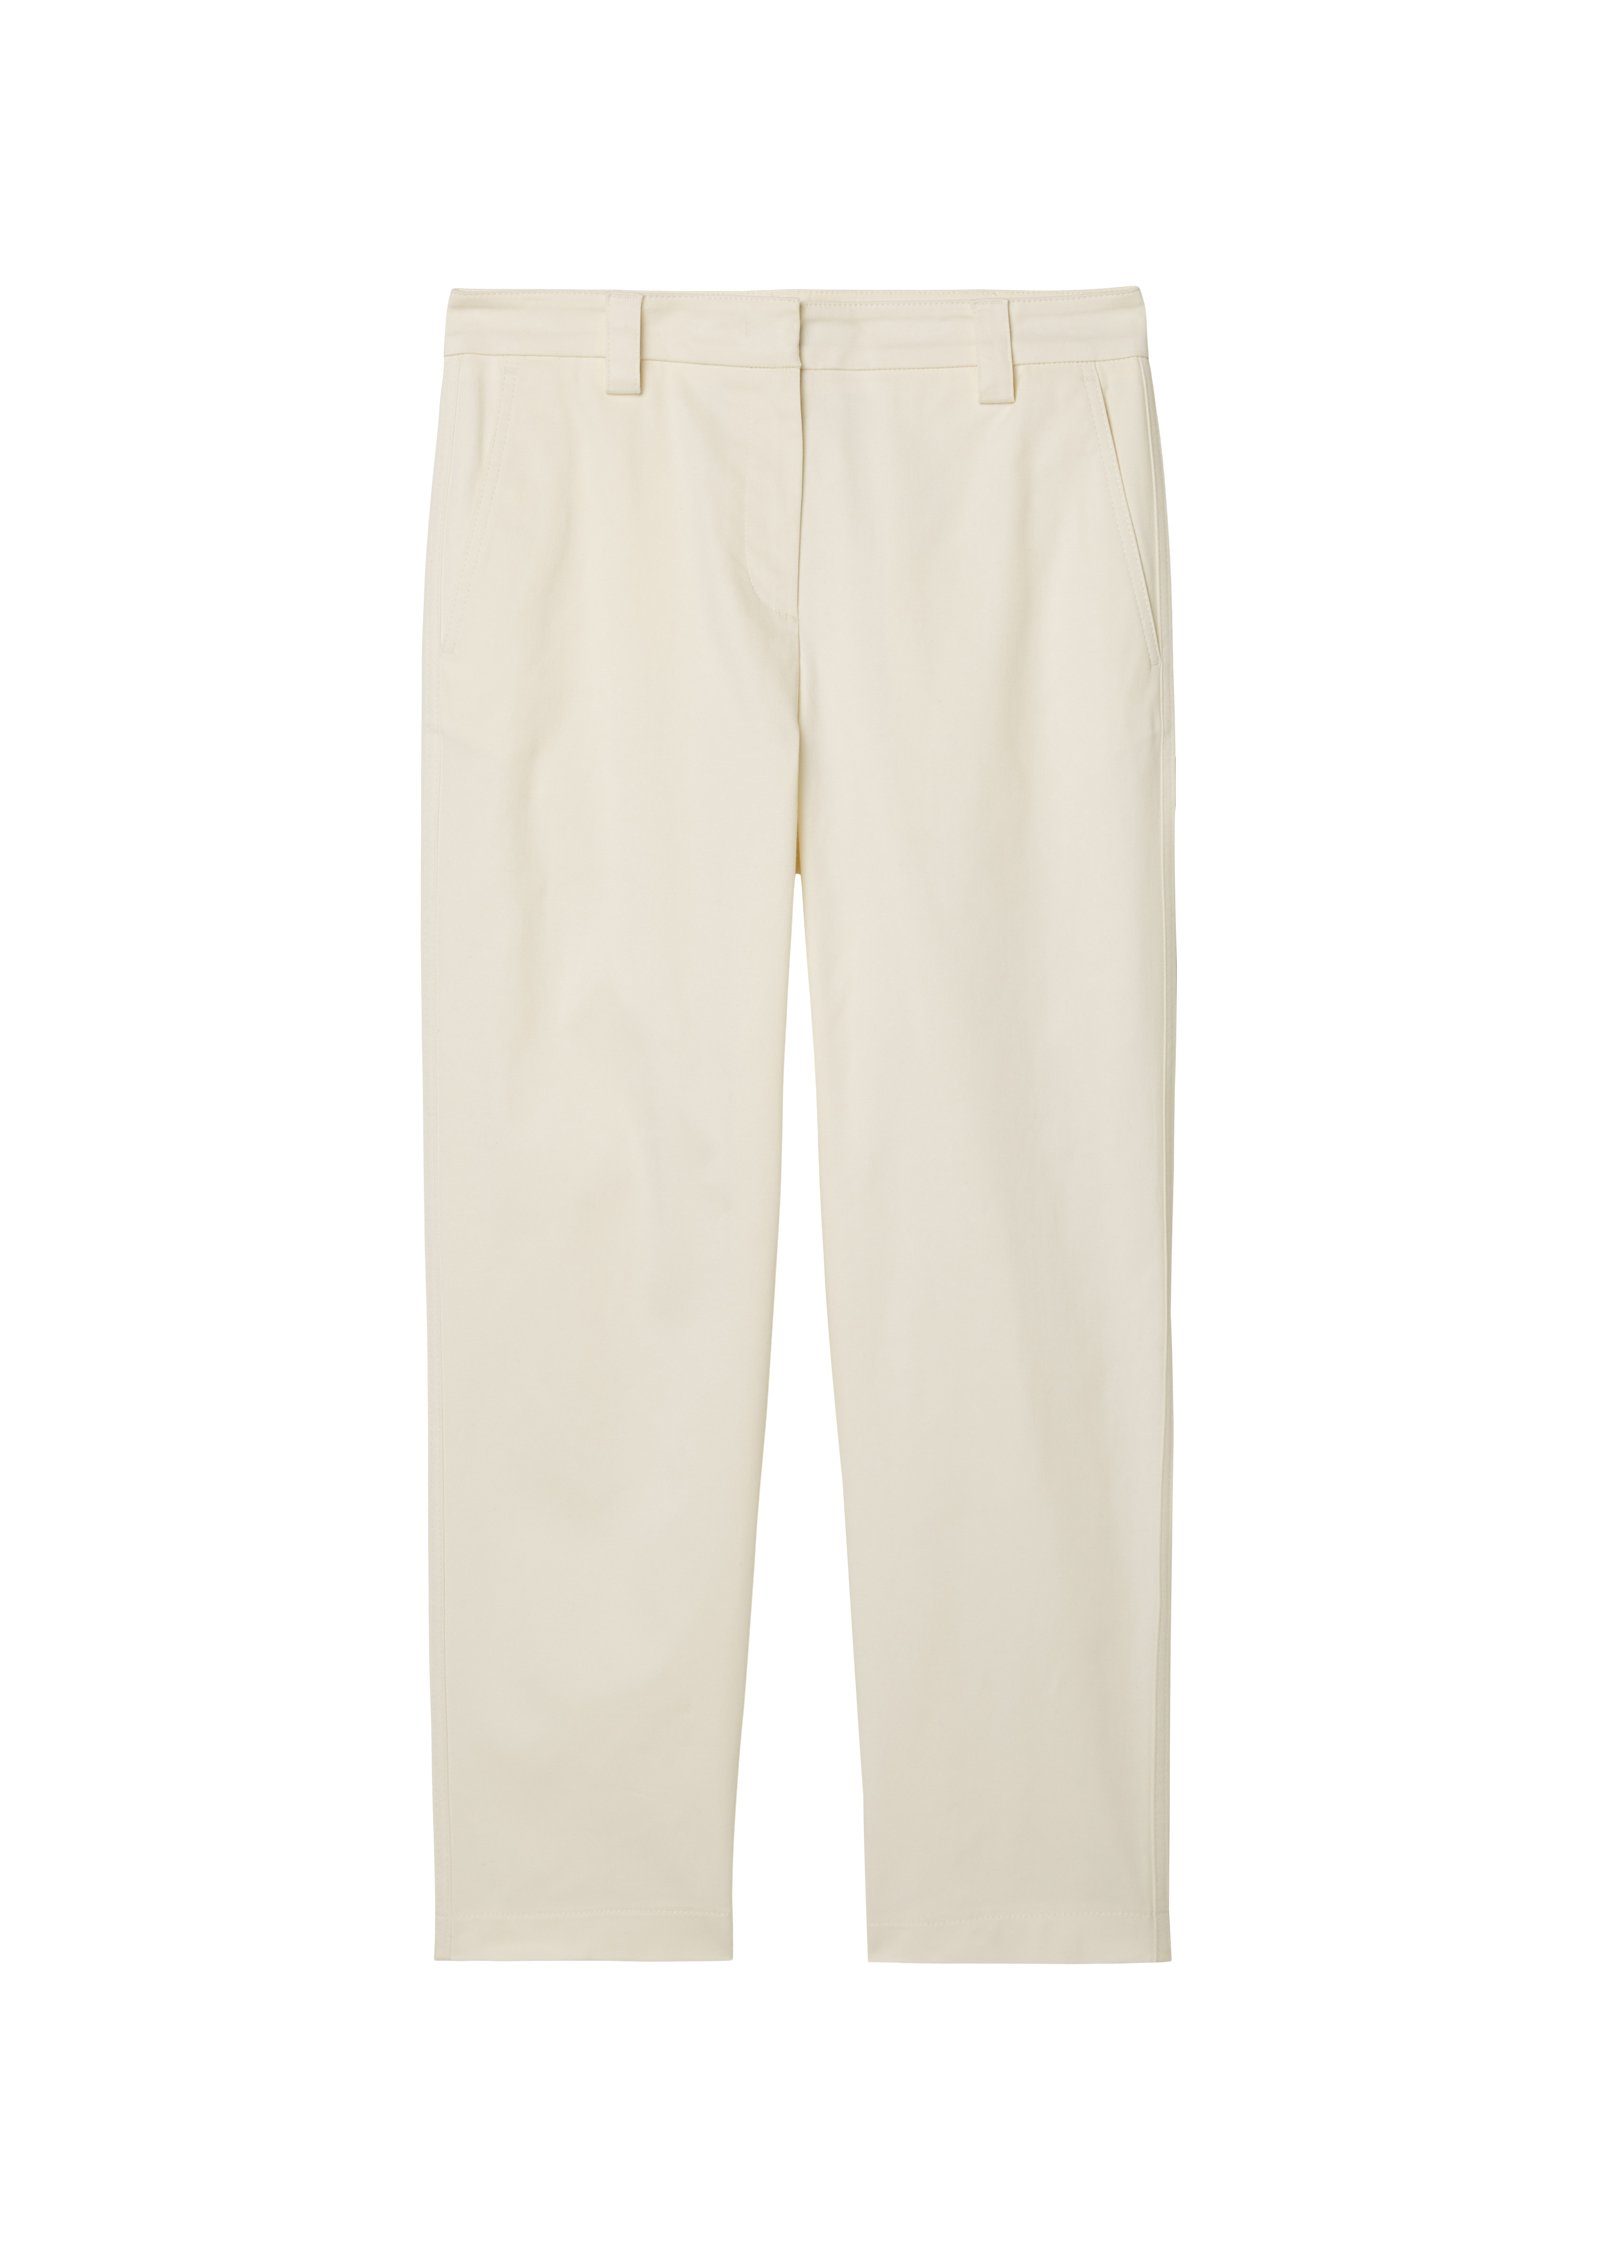 Marc O'Polo high leg, sand pocket Chino-Style im welt style, rise, modern chalky chino 7/8-Hose Pants, modernen tapered